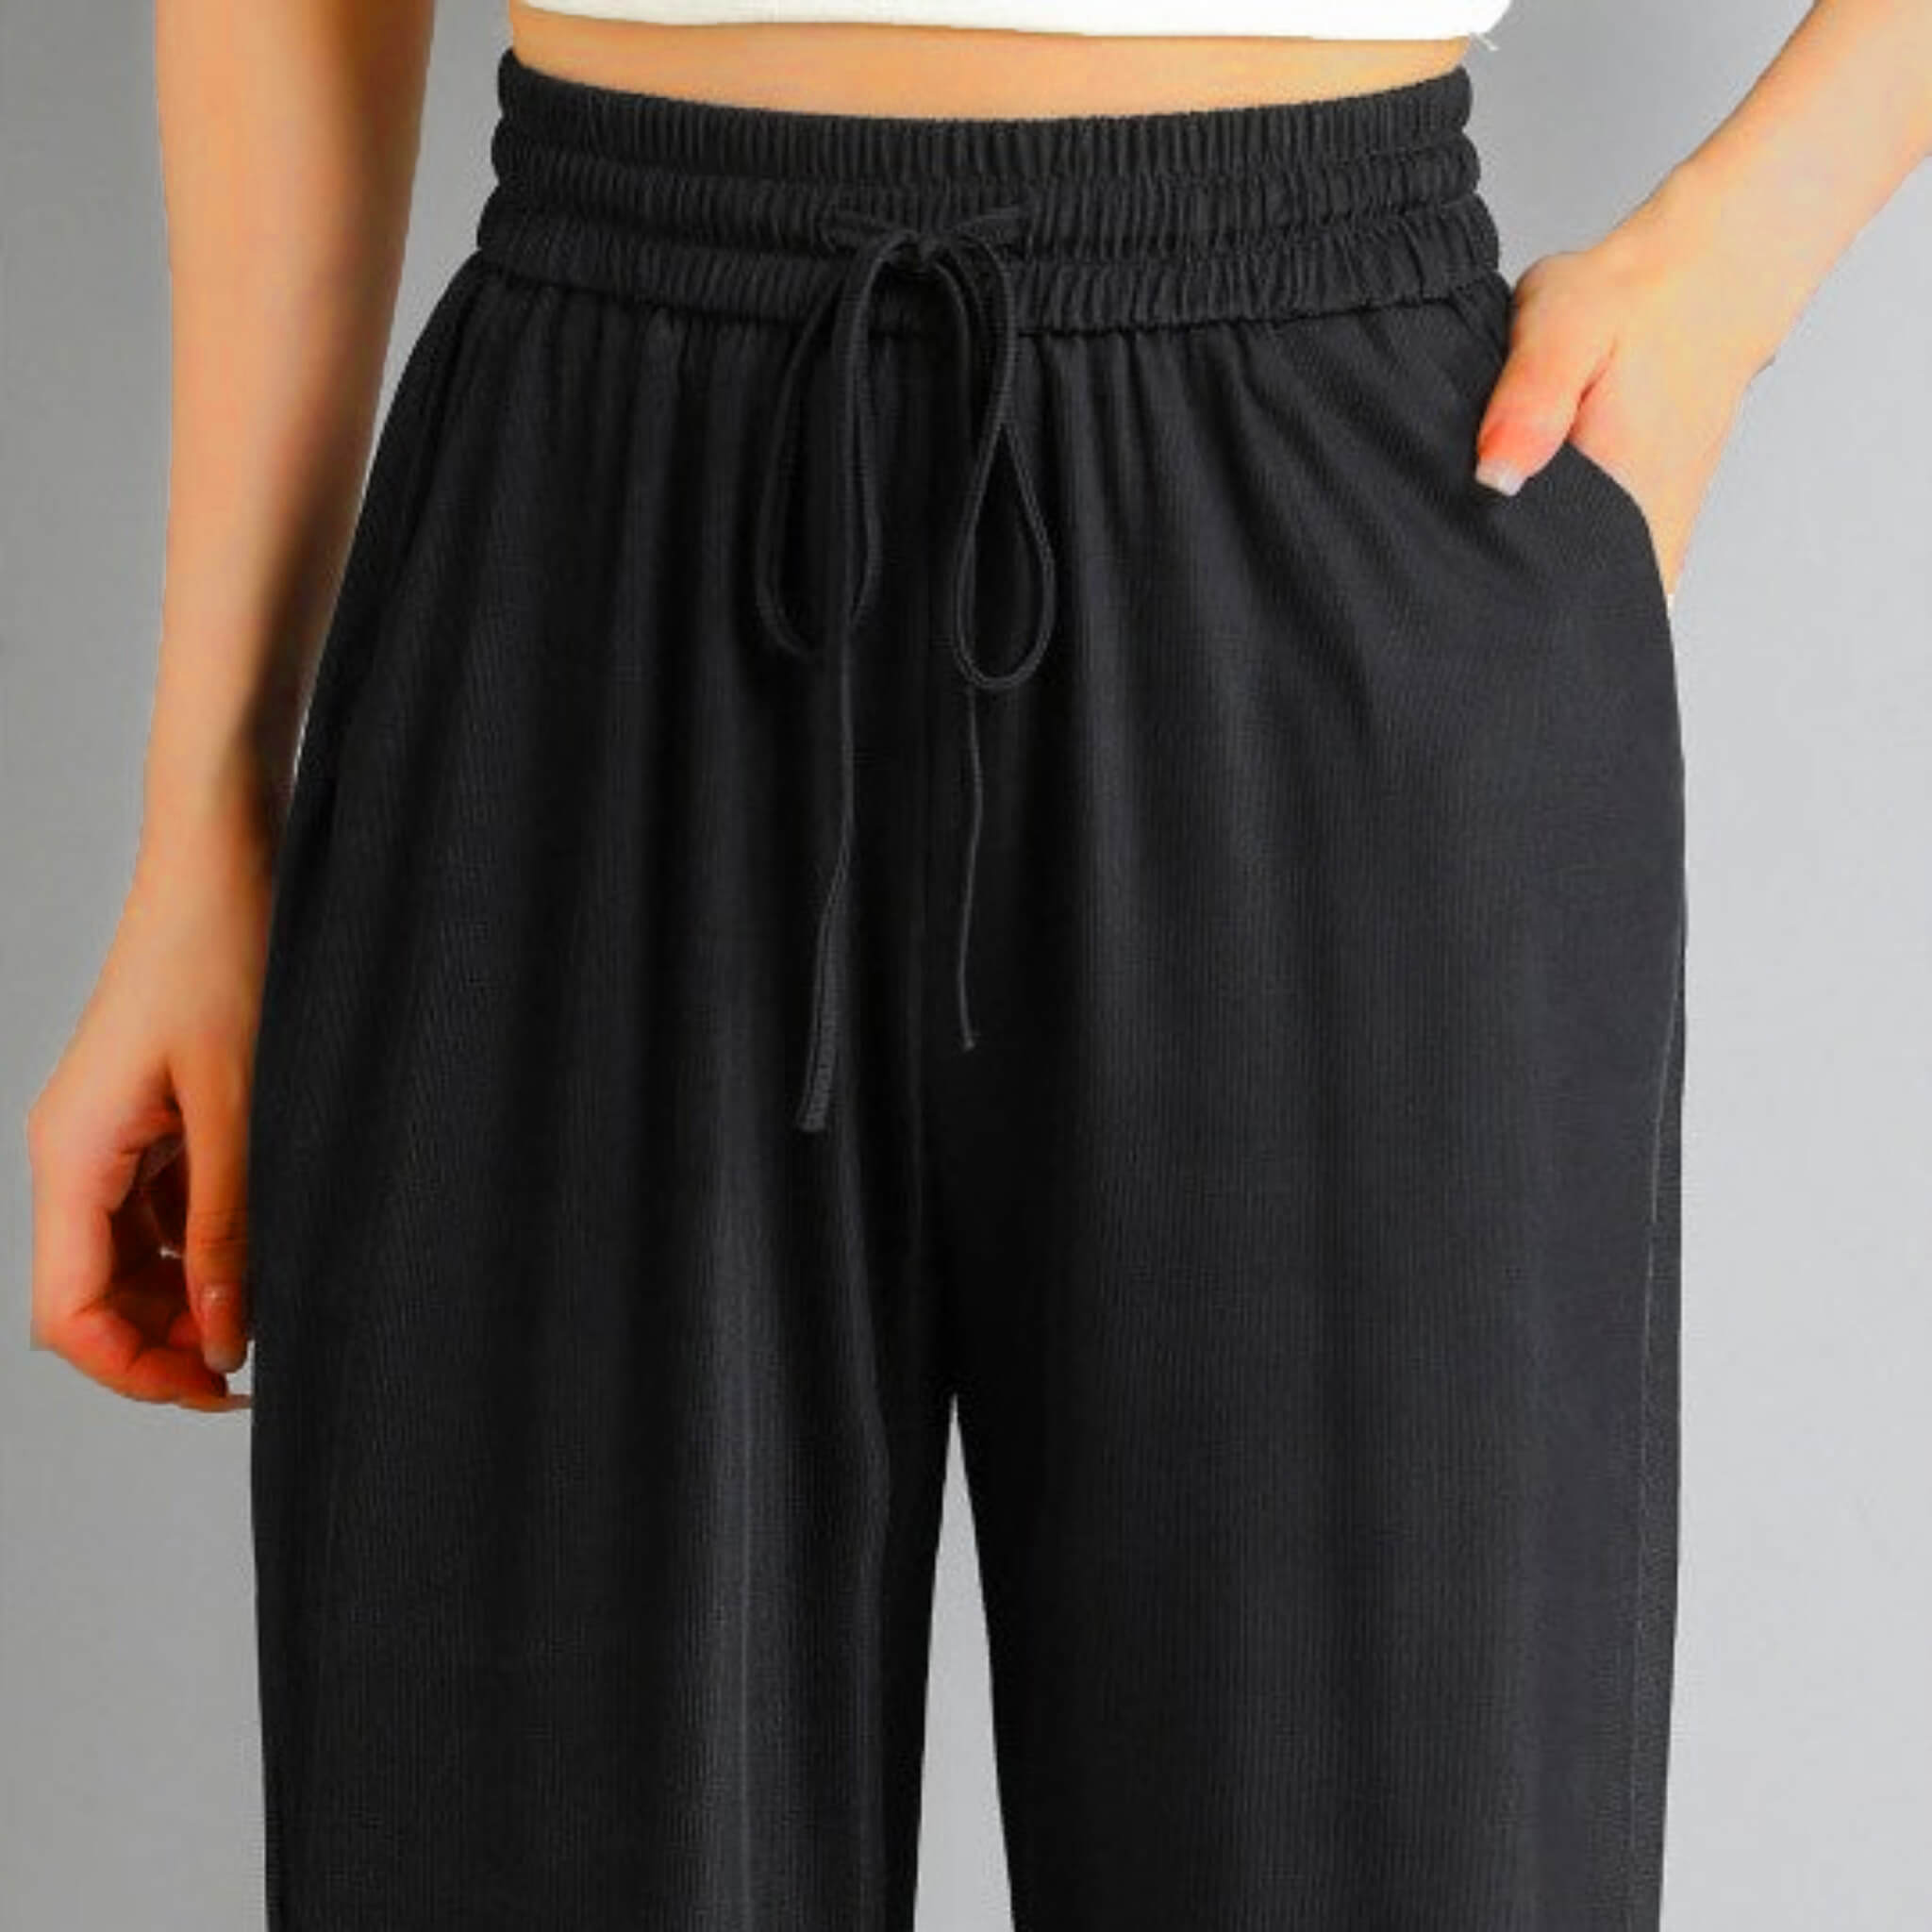 Women's High-waisted Relaxed fit Trousers  UponBasics   